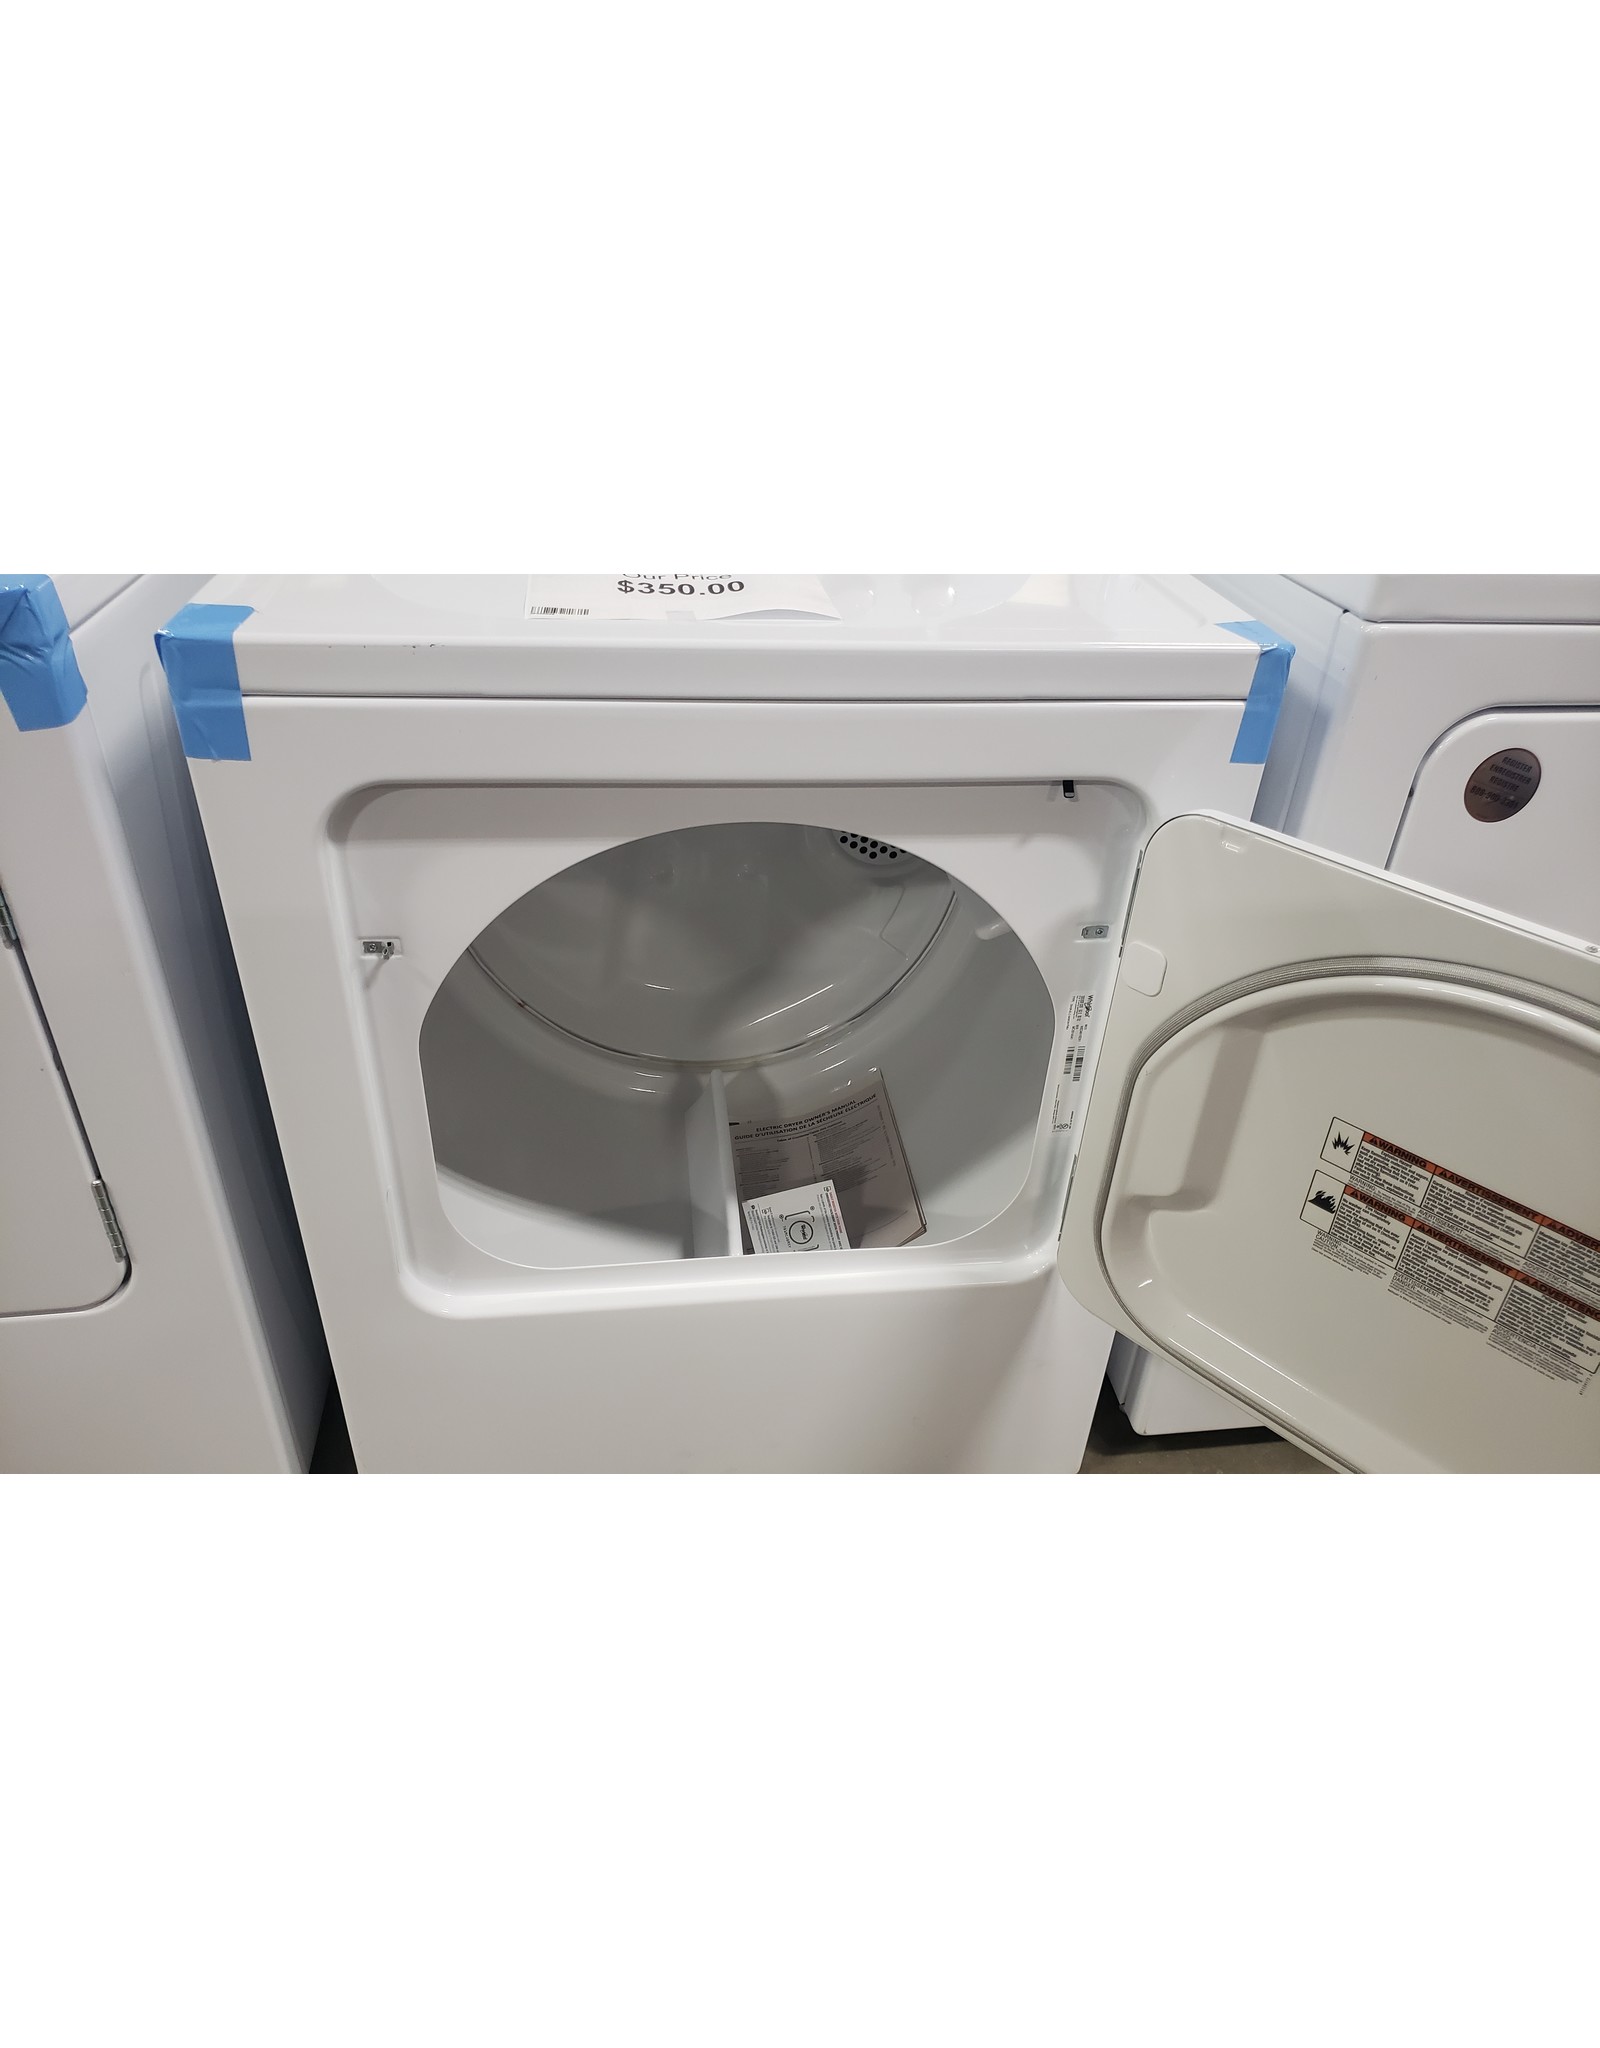 BWD Scratch & Dent Electric Dryer WED4815EW